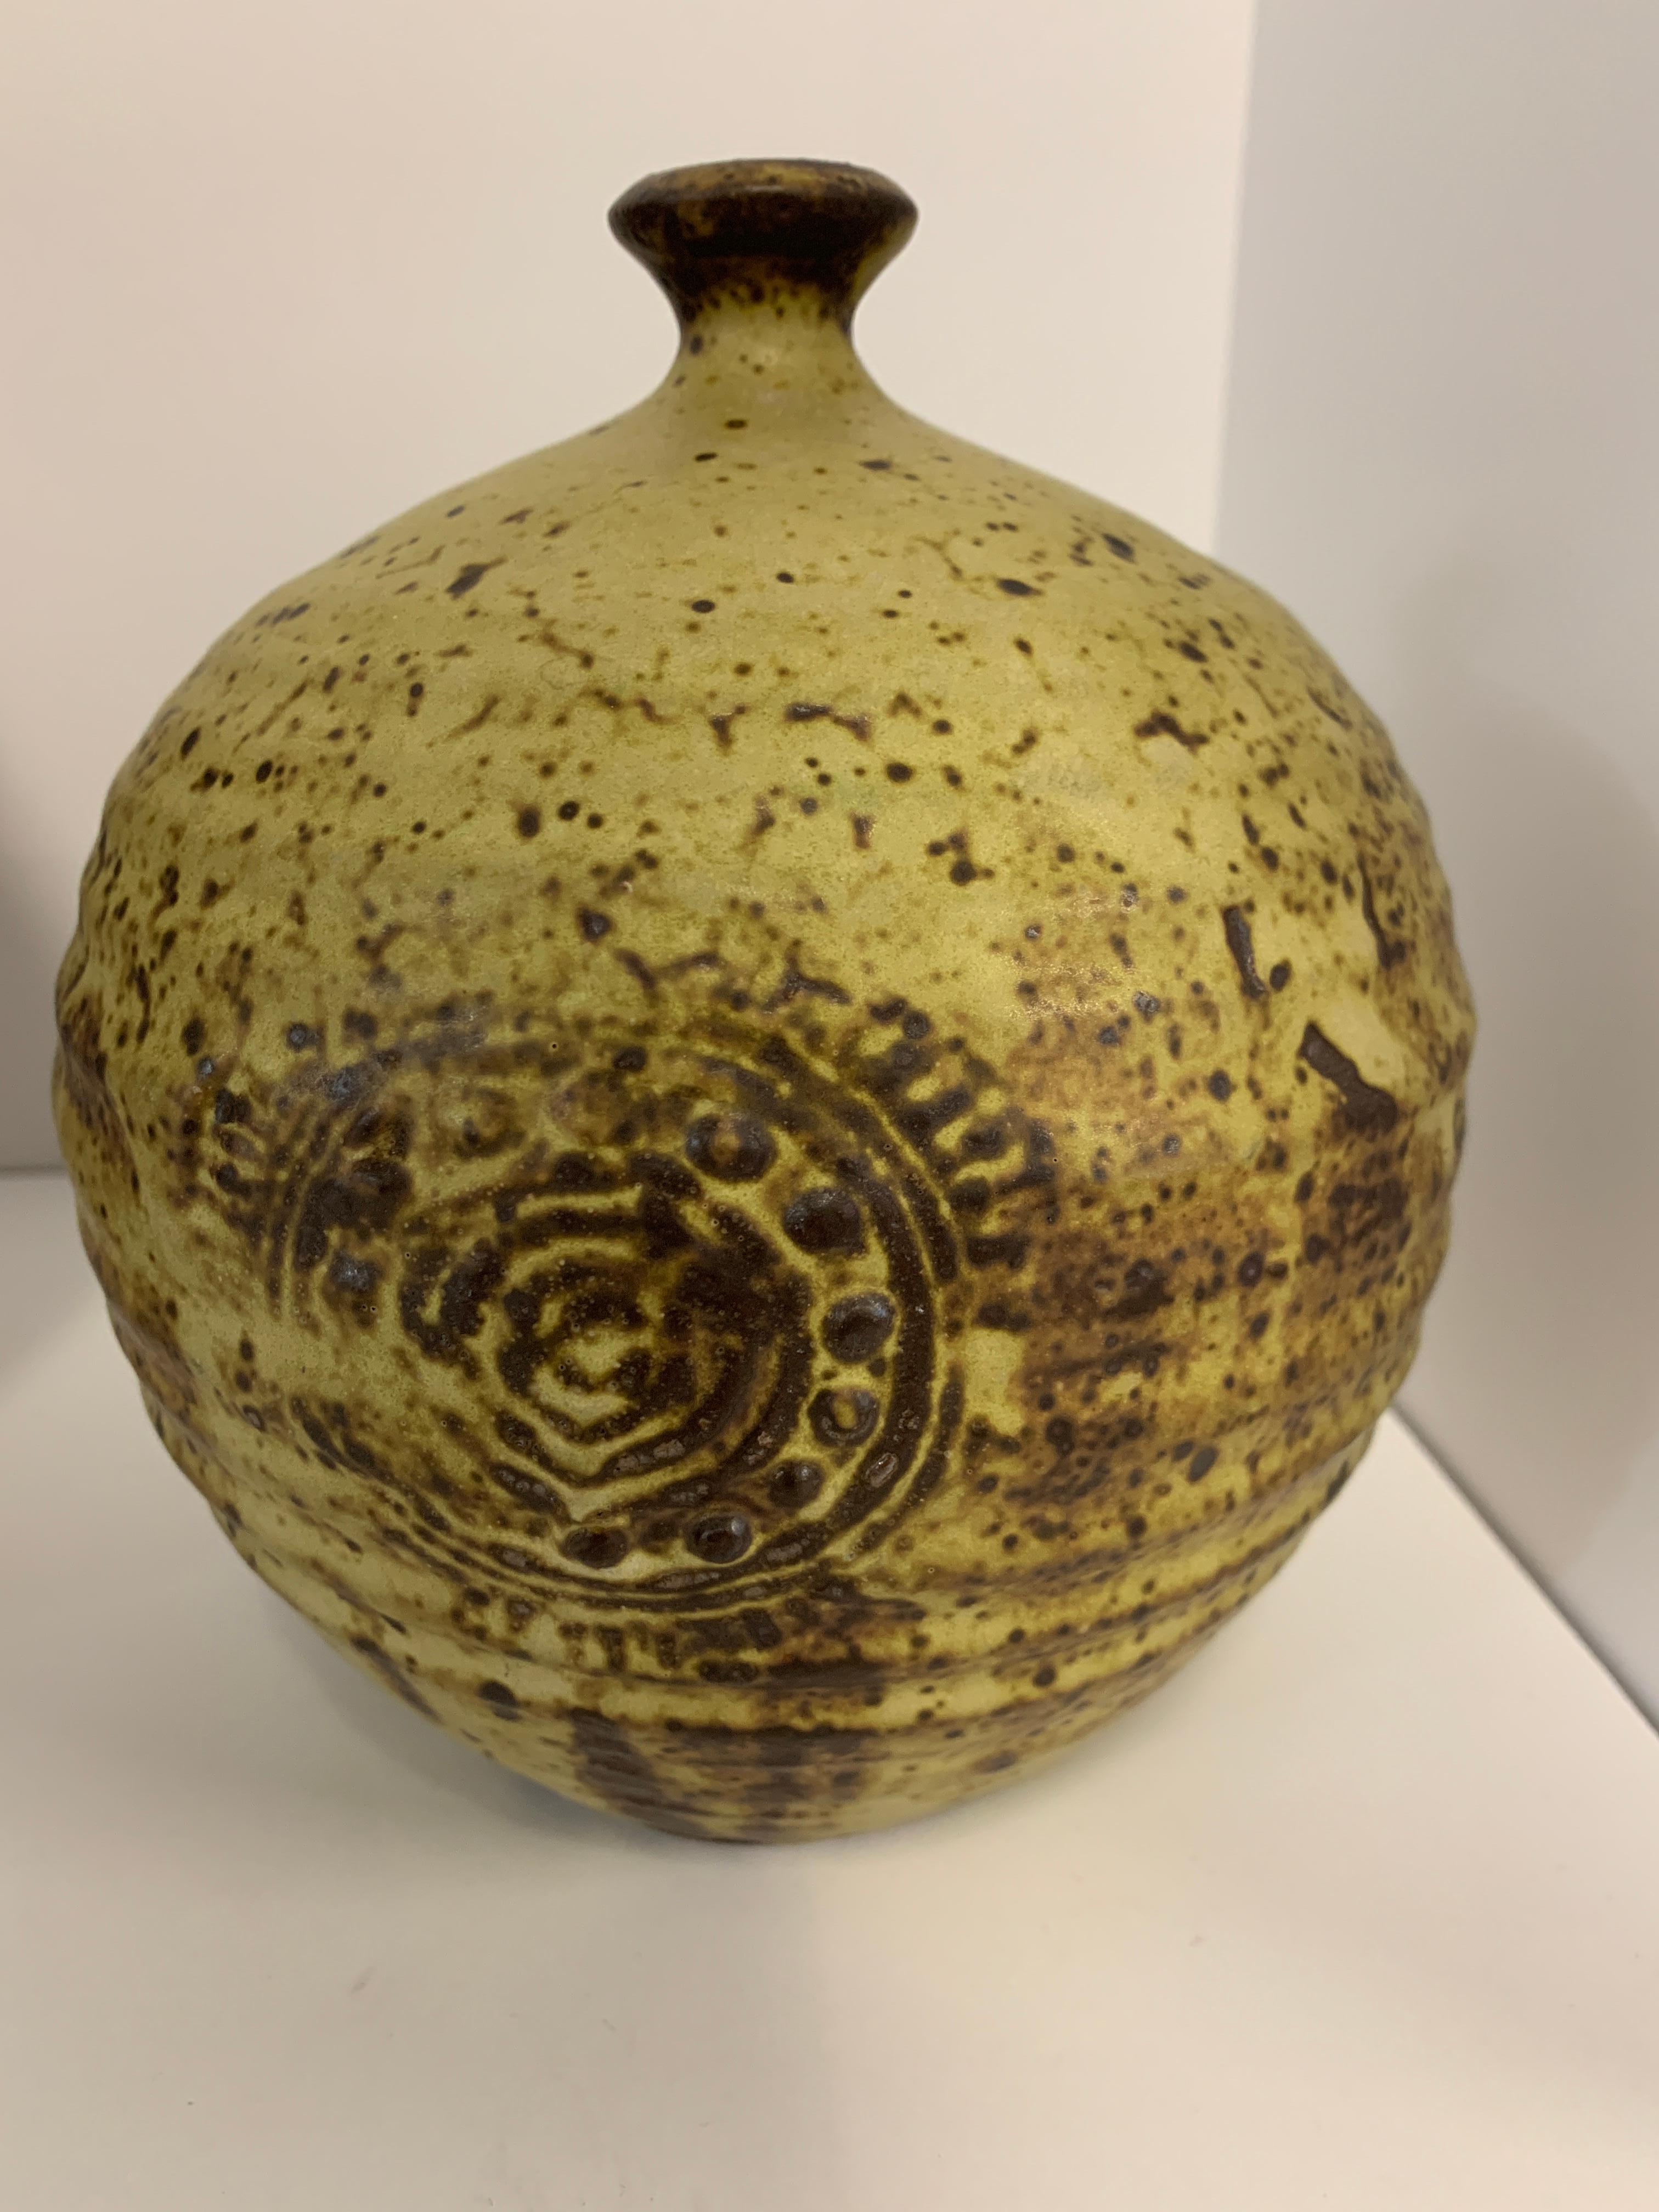 A group of 3 art pottery vases. They vary in size from 13.5 inches tall to 7.5 inches tall. The tallest is 13.5 inches tall and 3.5 inches in diameter. The smallest is 7.5 inches tall and 6.5 inches in diameter. They are in good age appropriate